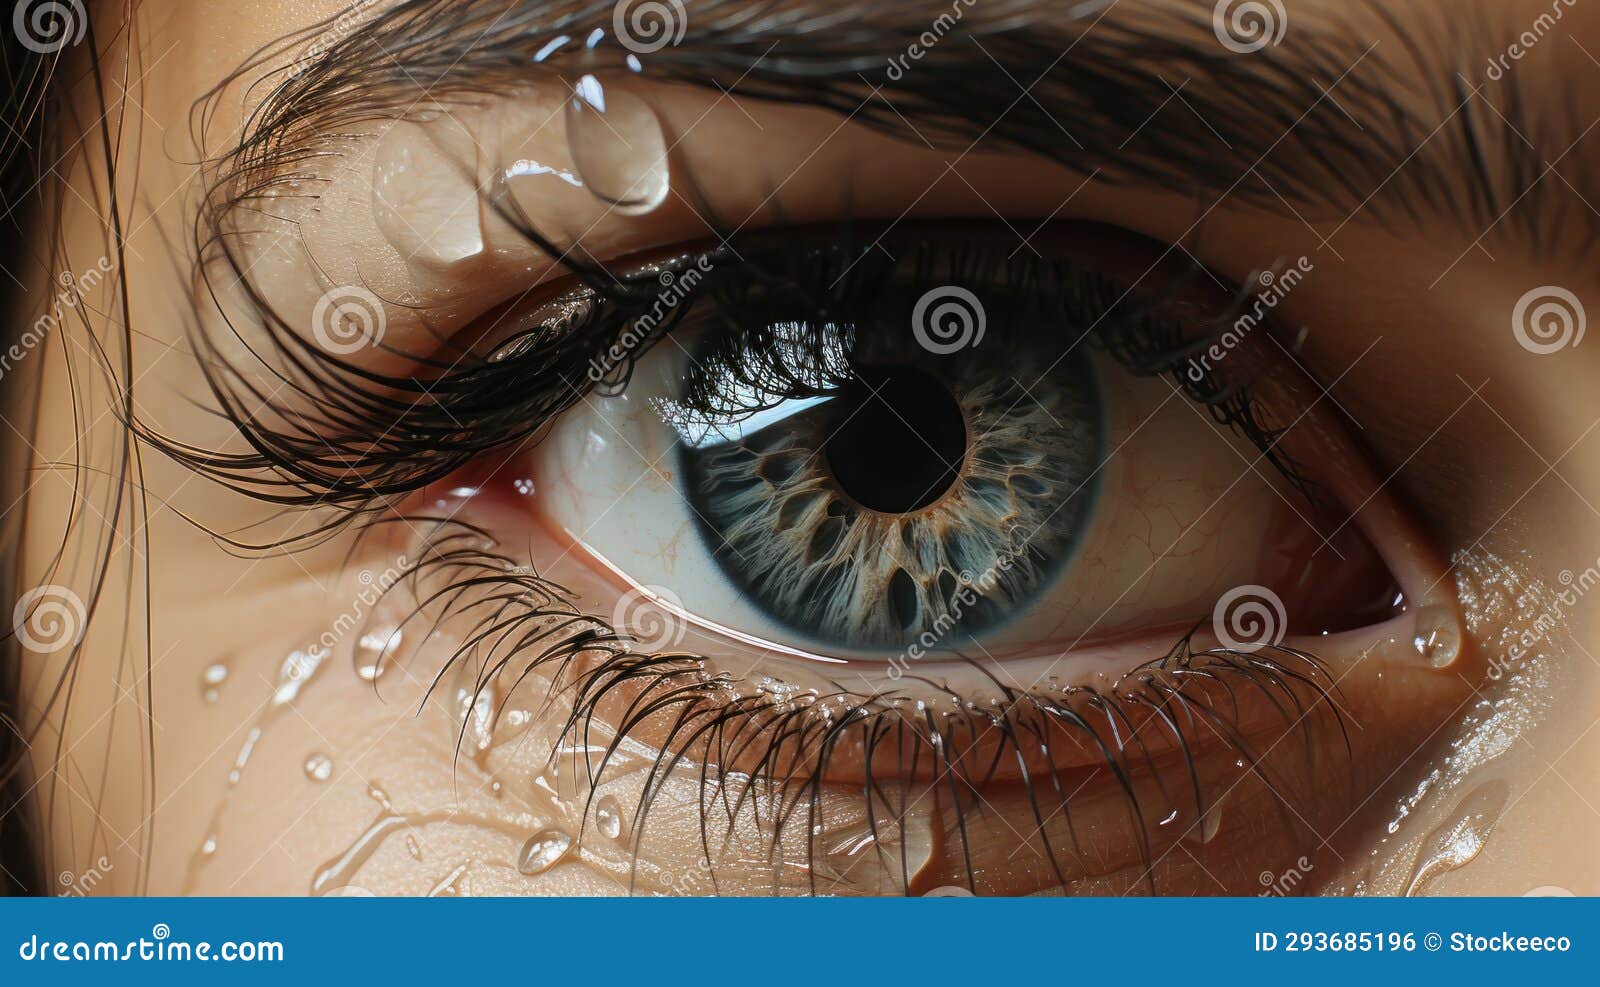 Scared Eyes: Hyperrealistic 3d Rendering of a Woman S Eye with Water ...